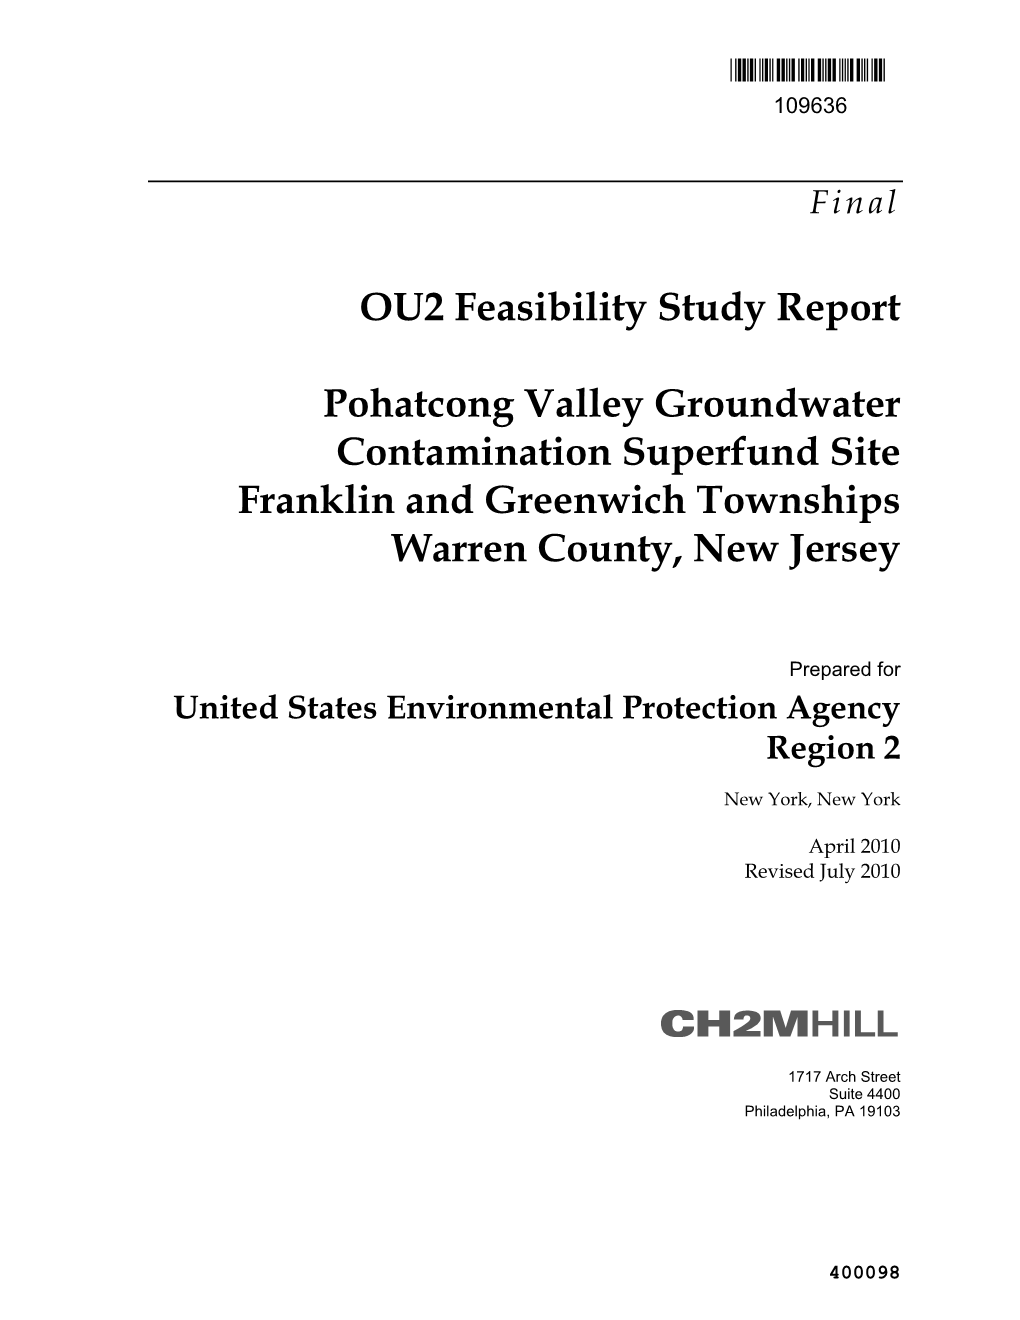 Final OU2 Feasibility Study Report, Pohatcong Valley Groundwater